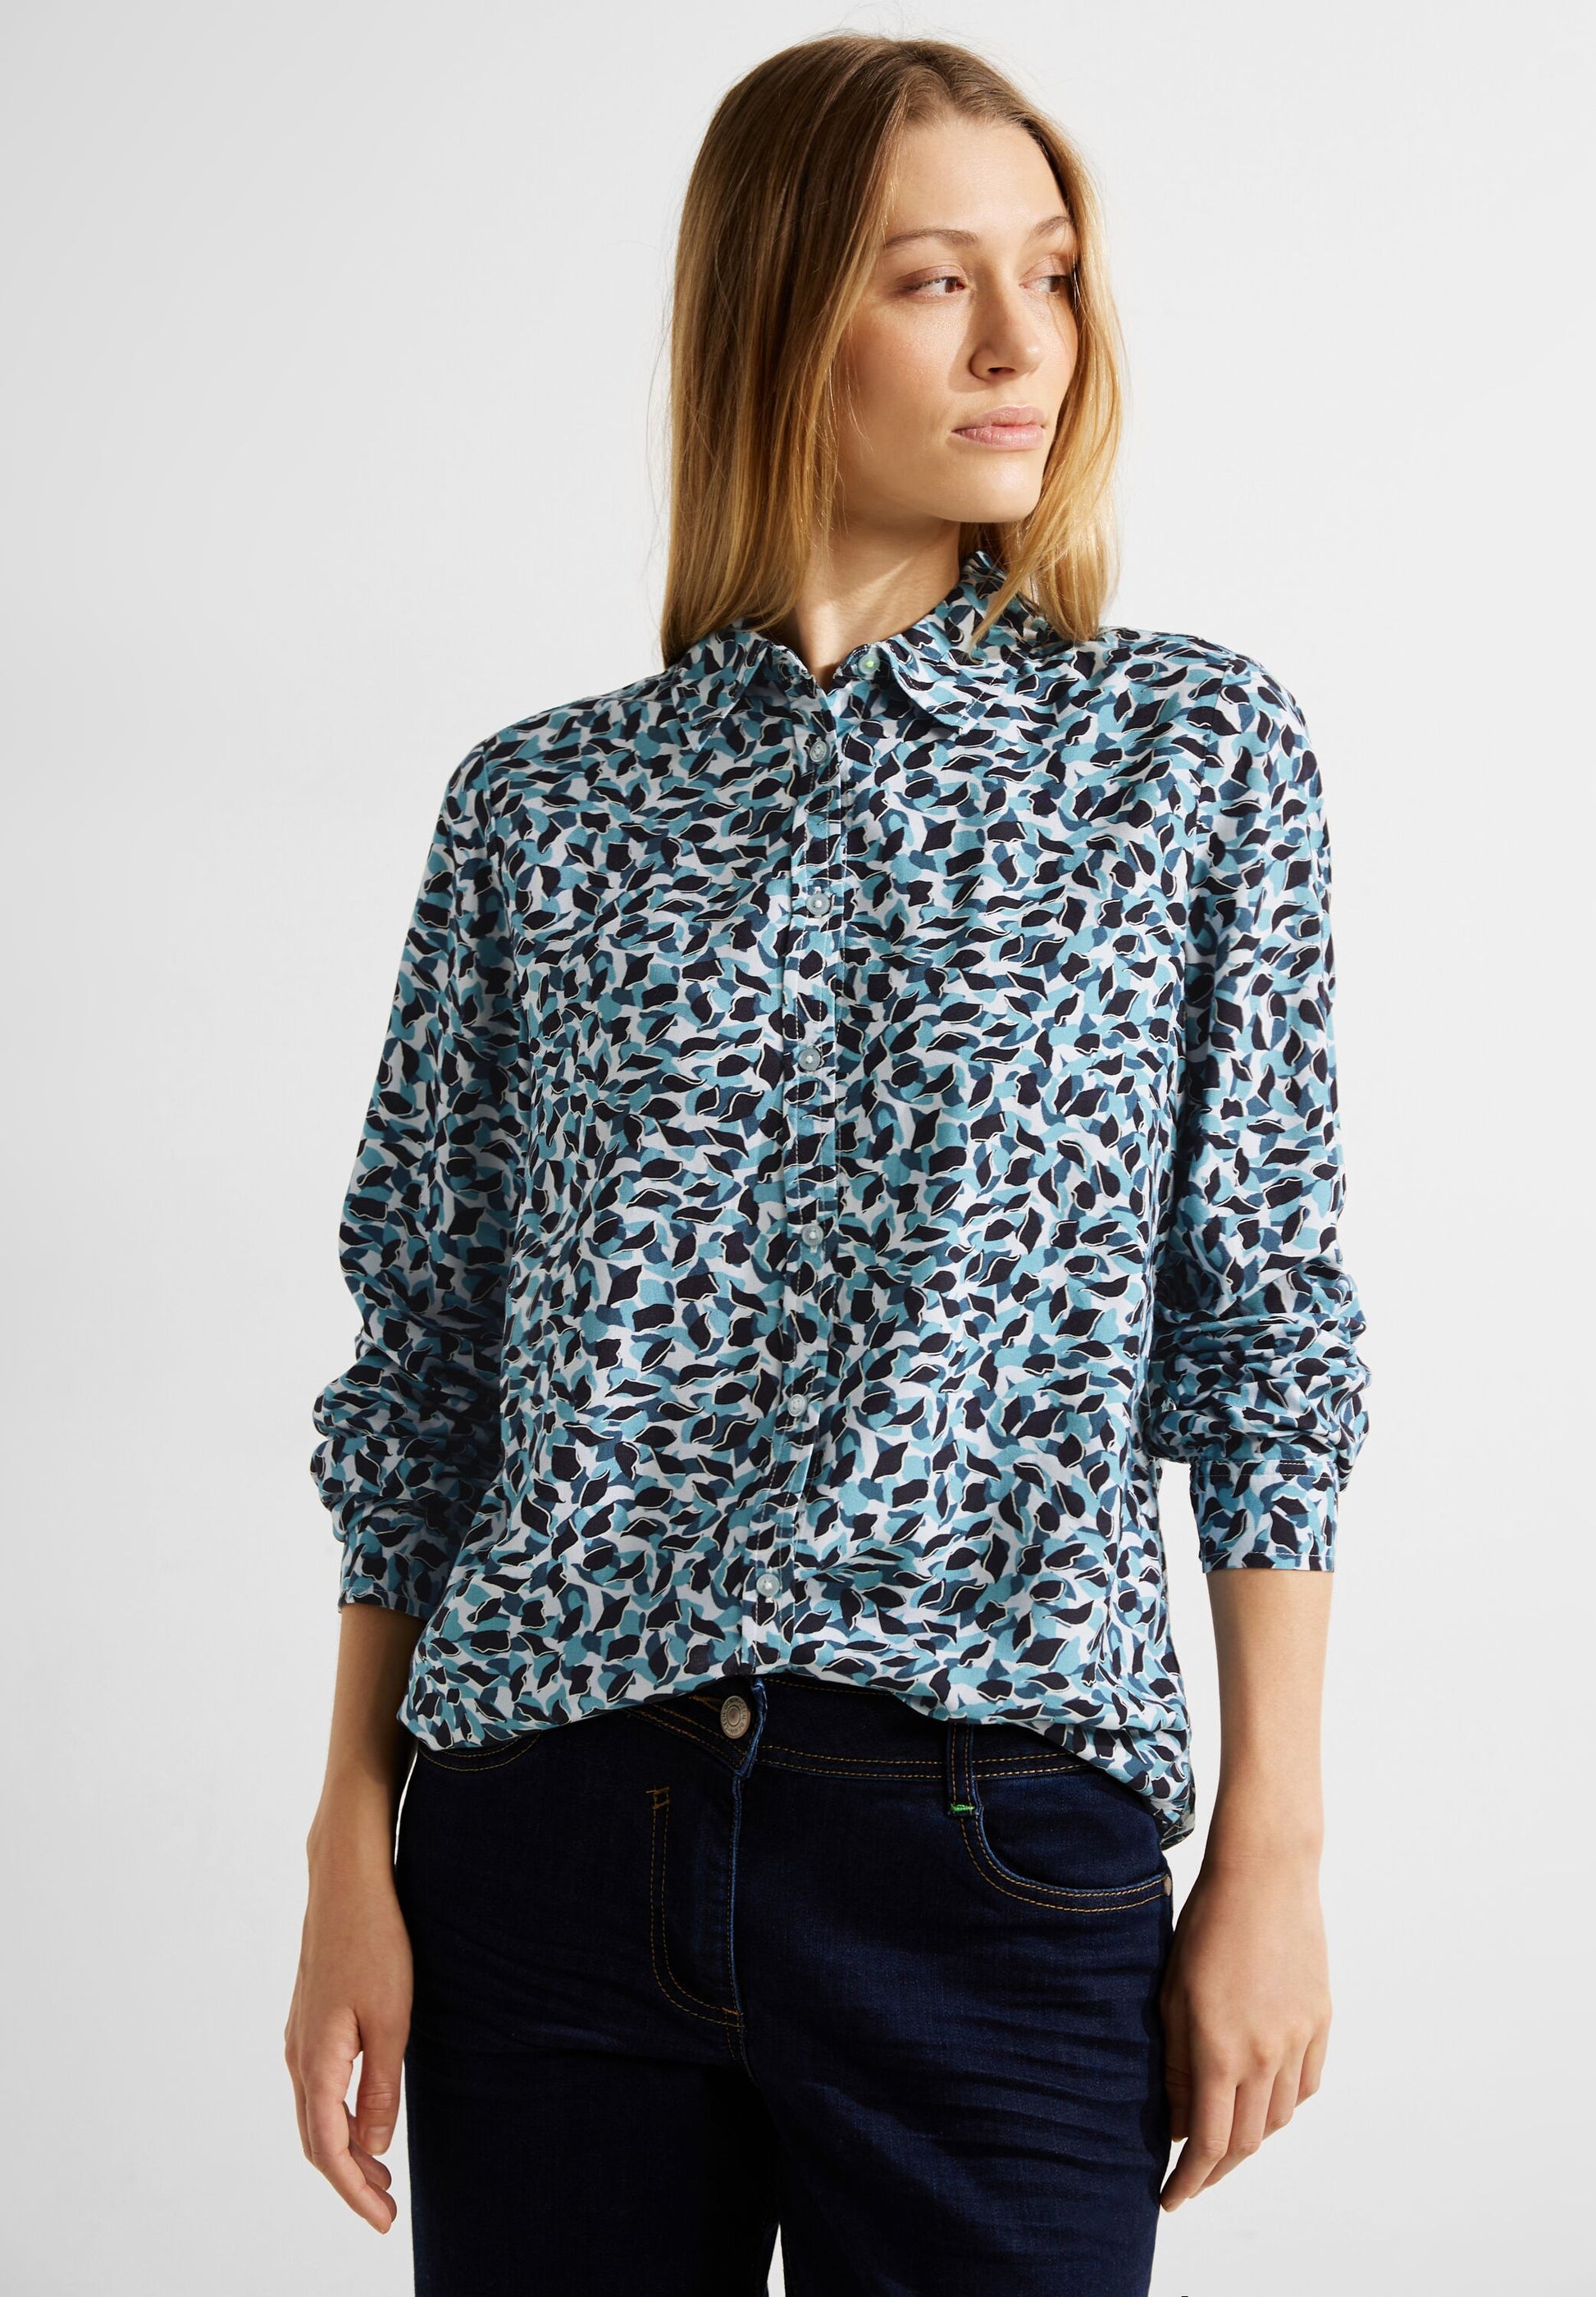 - Bluse petrol TWISTY strong – Farbe: CECIL Print mit blue grafischem Mode -